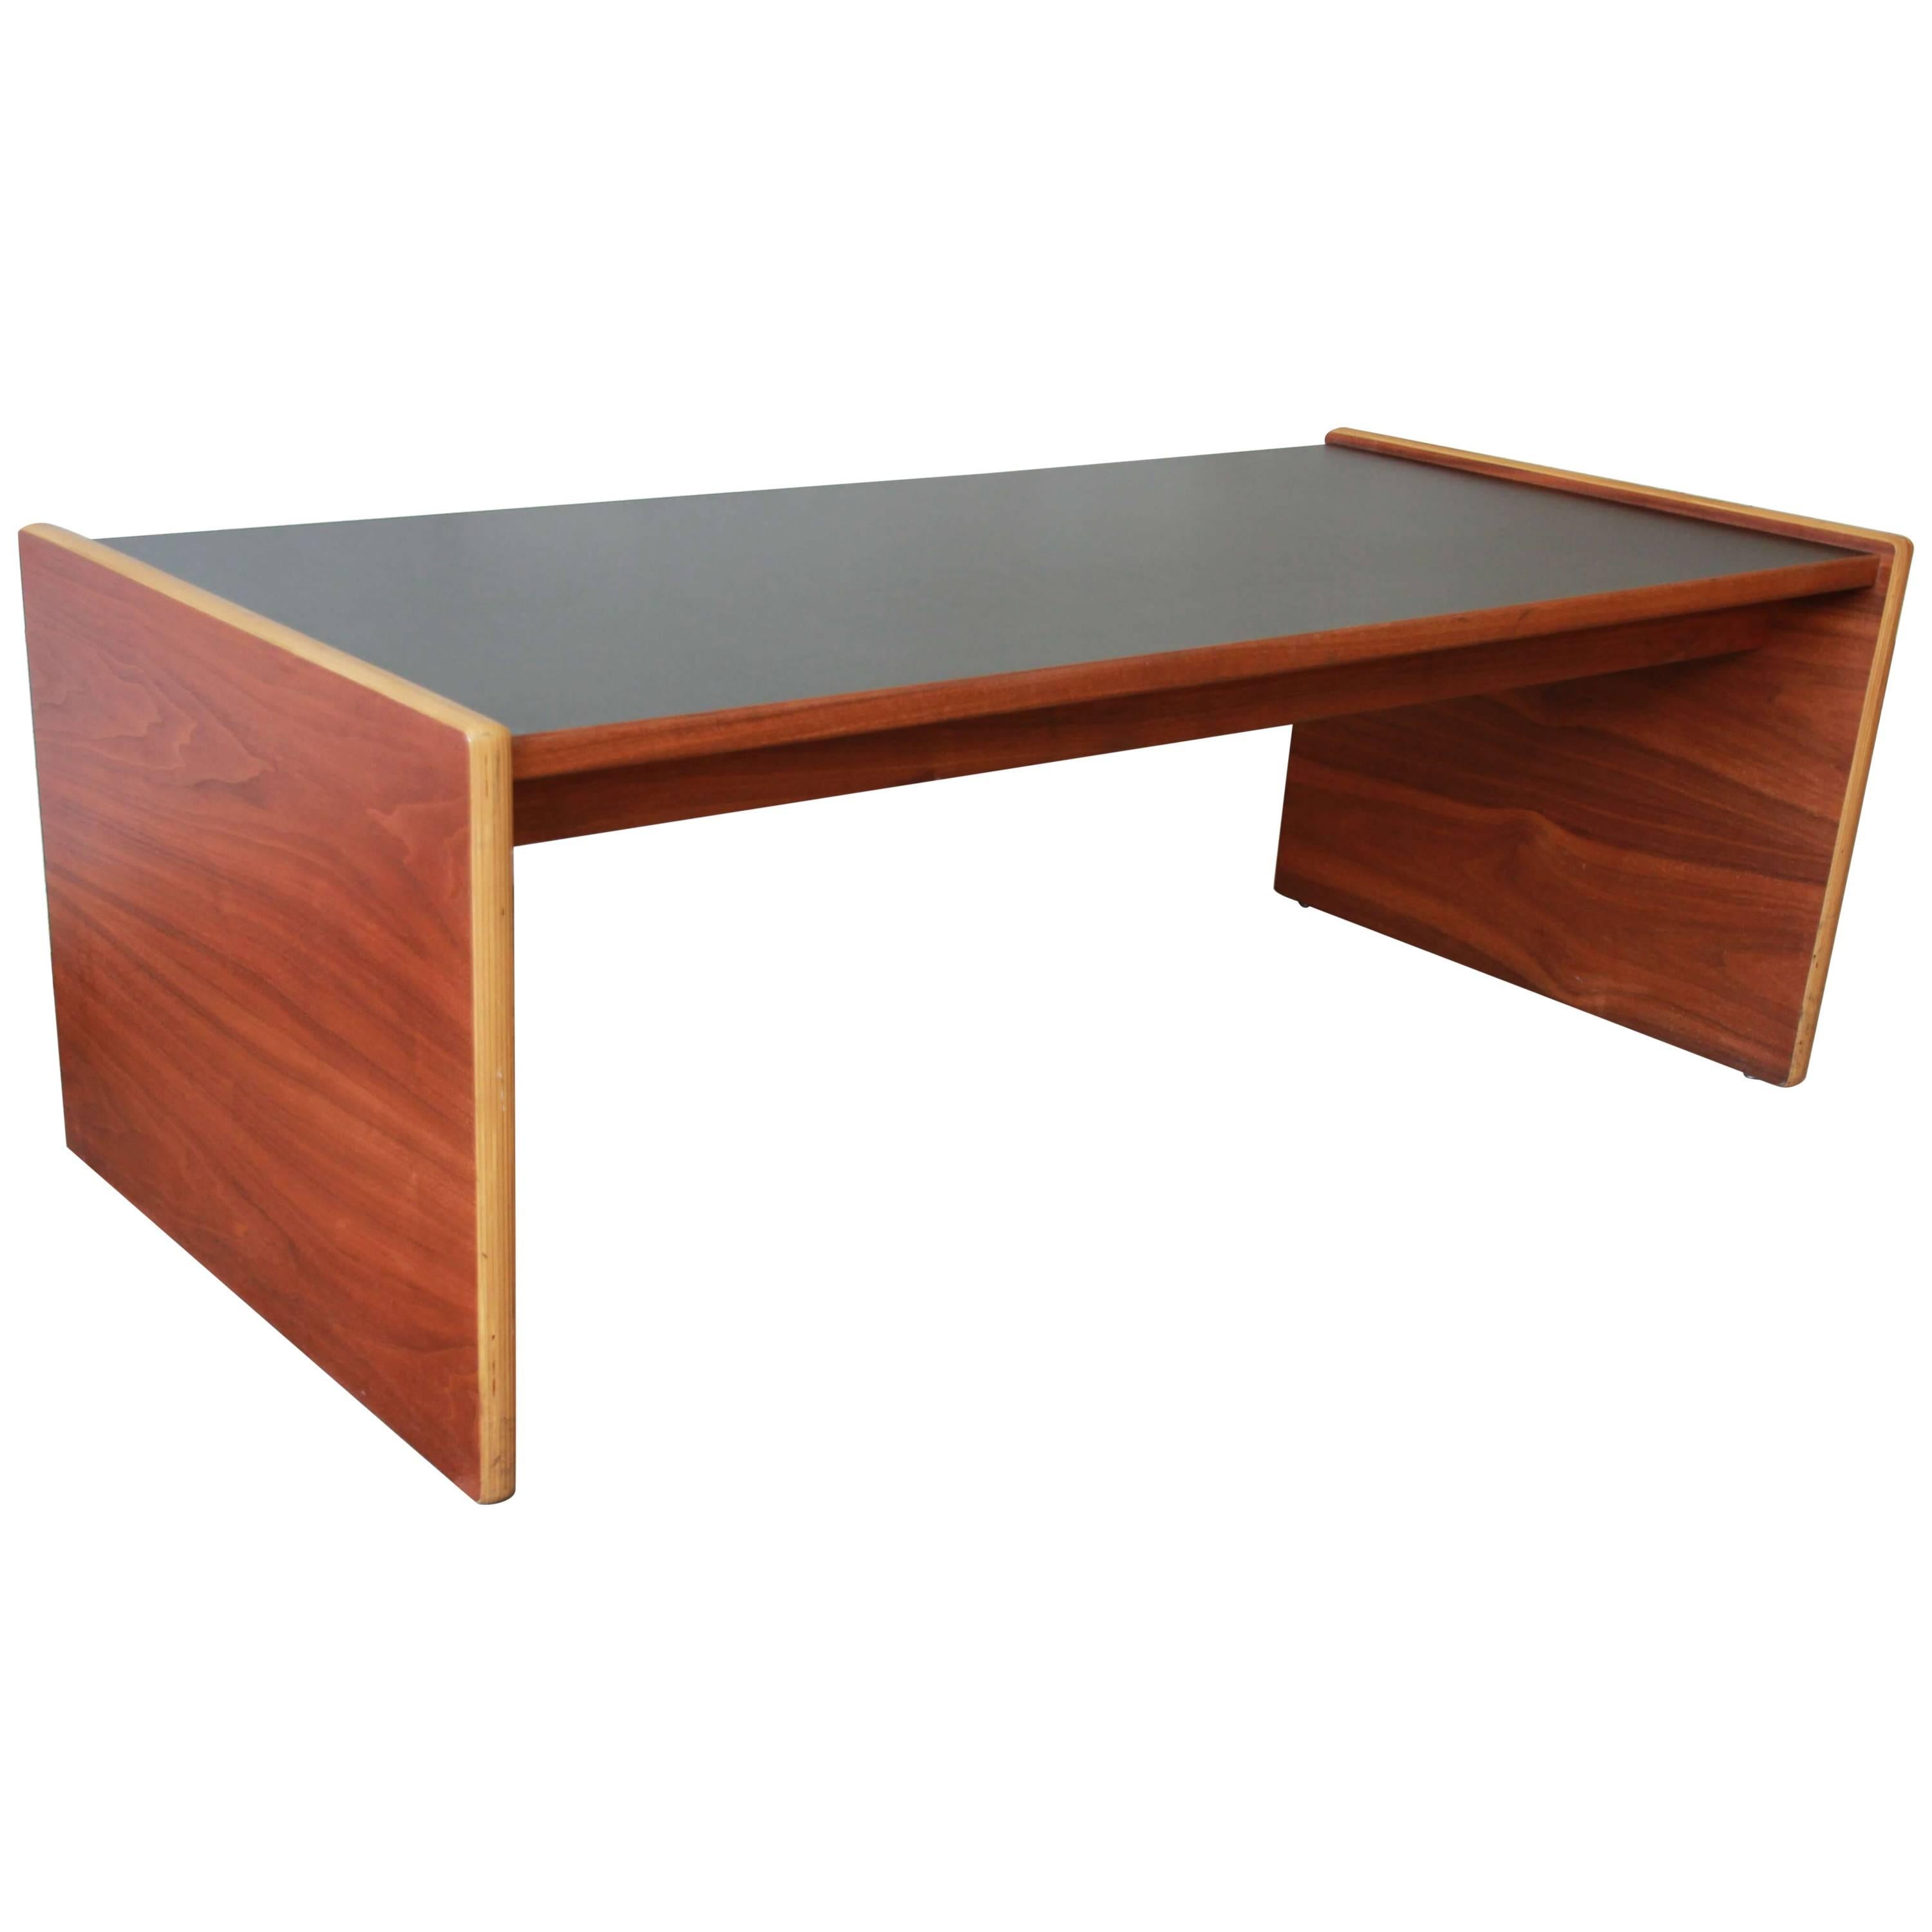 Jens Risom Mid-Century Modern Coffee Table or Bench